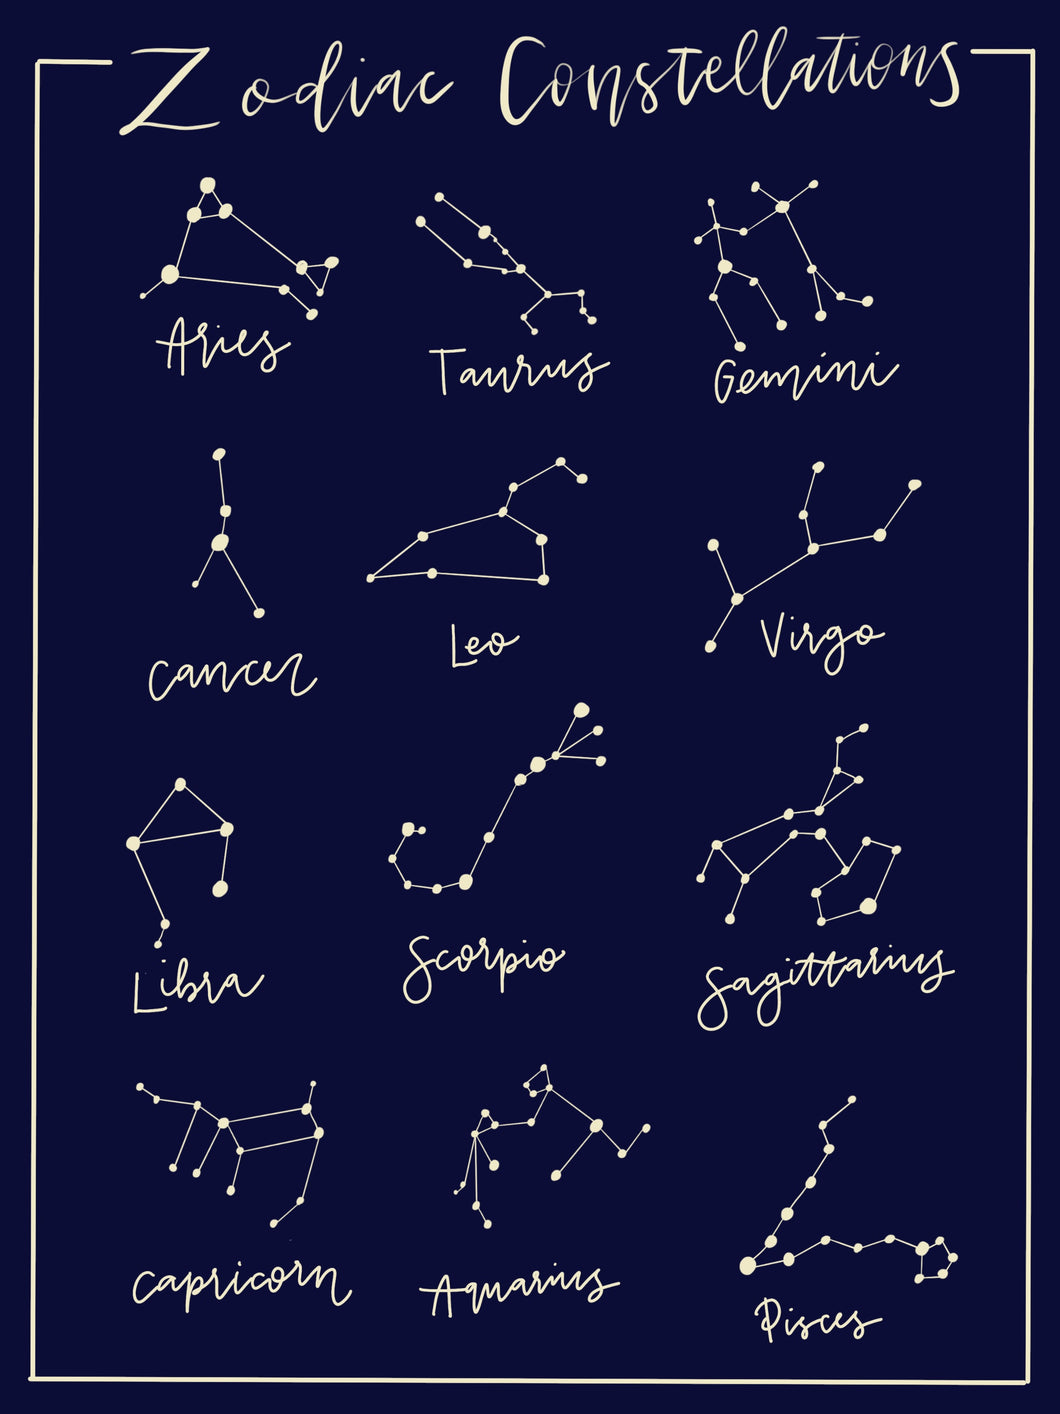 october 7th astrology star sign